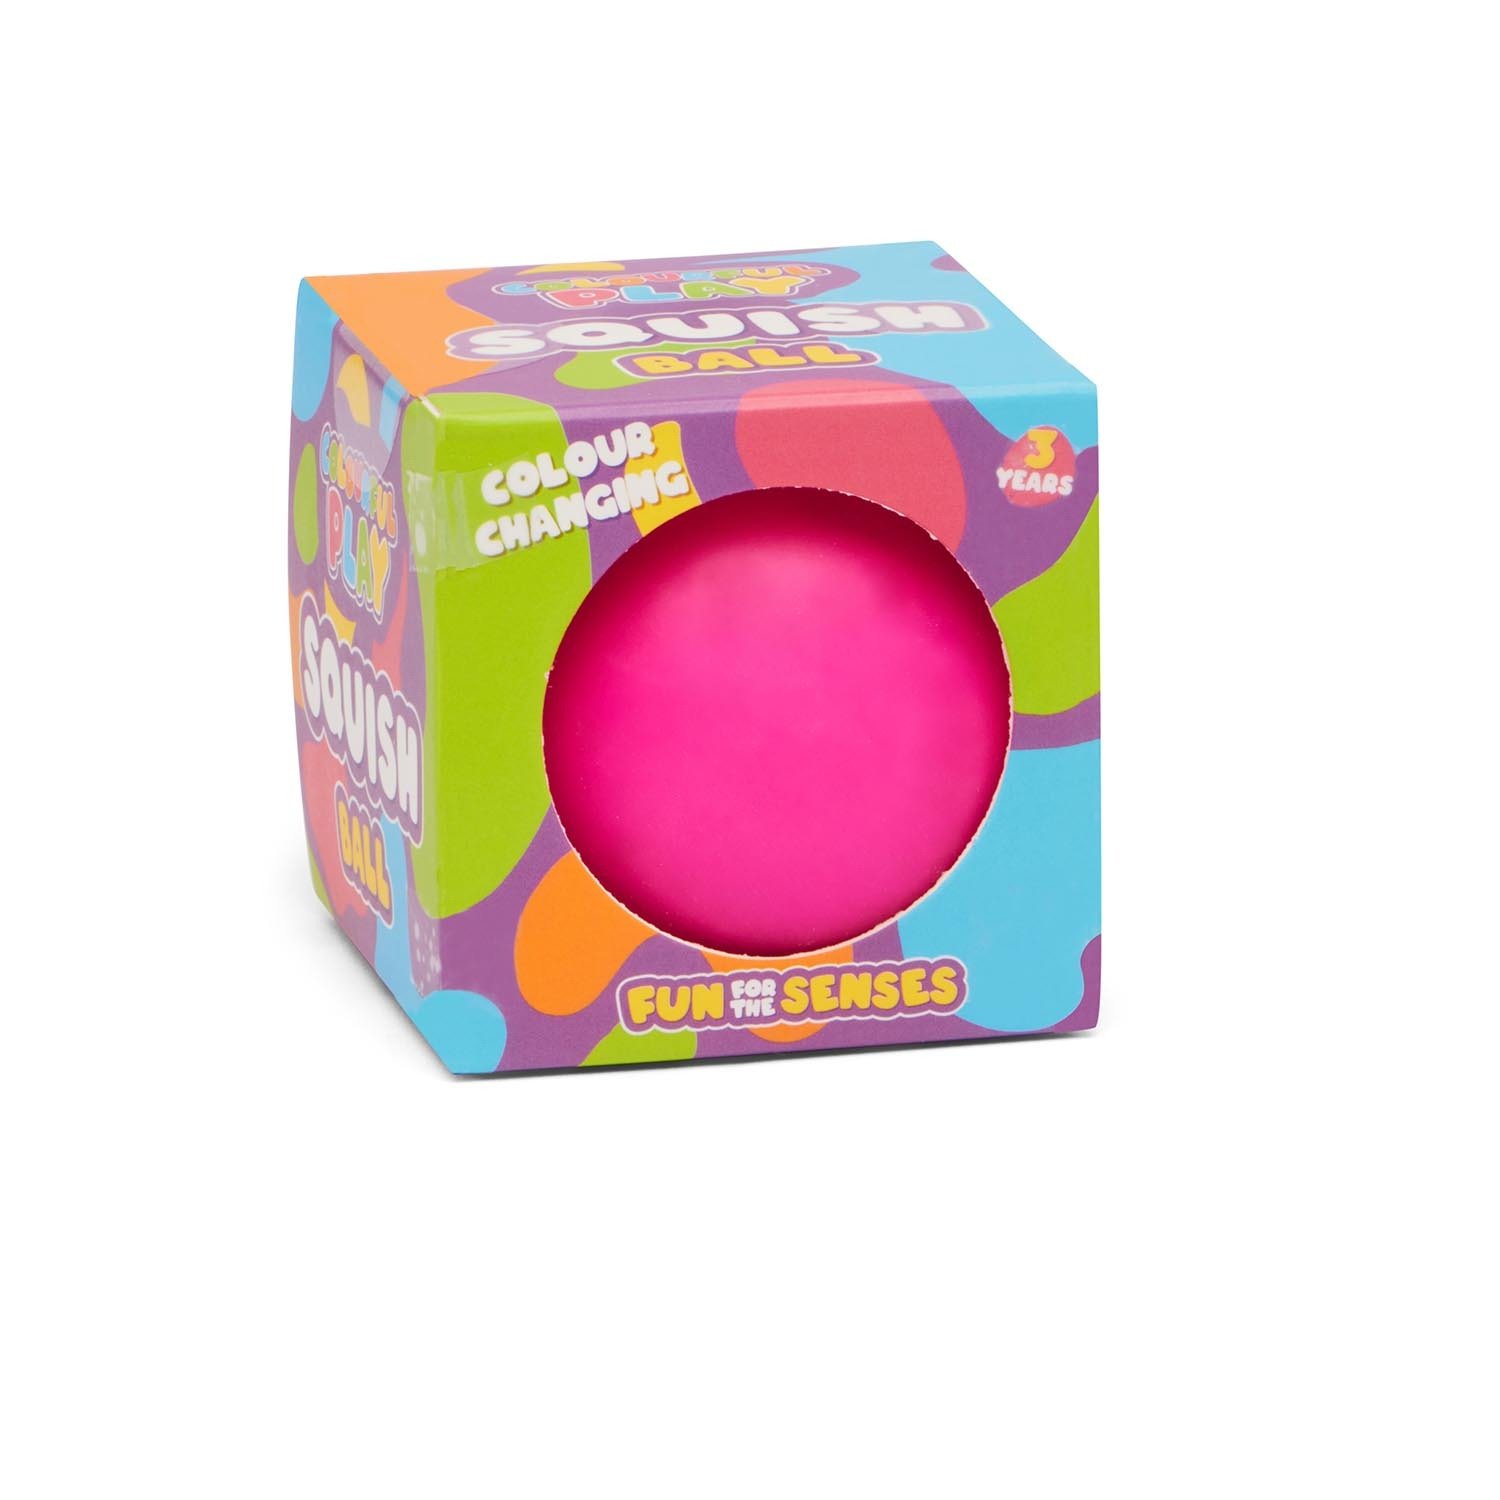 Single ToyMania Colour Changing Sensory Squish Ball in Assorted styles Image 4